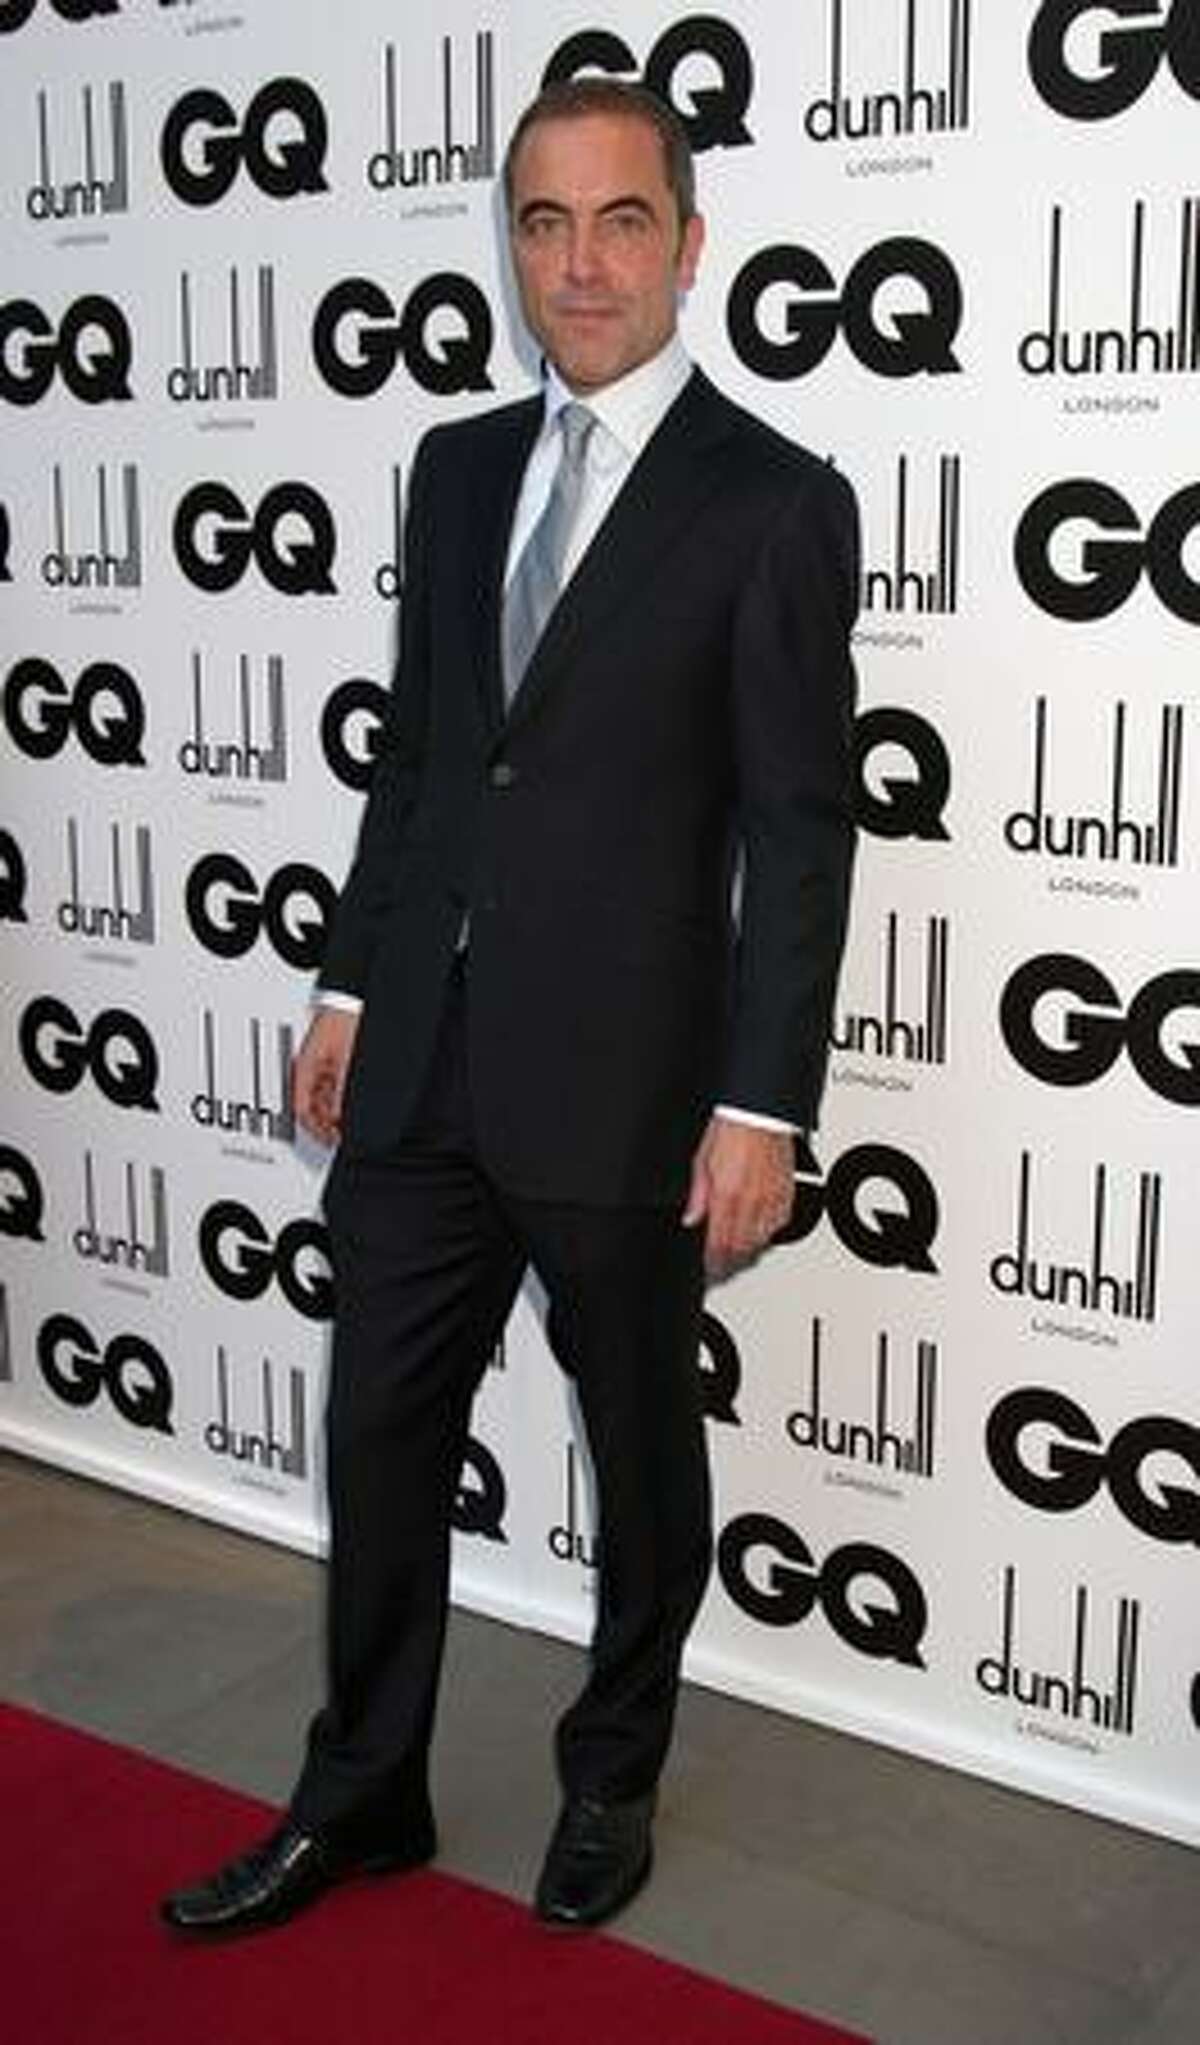 Actor James Nesbitt arrives for the 2009 GQ Men Of The Year Awards at The Royal Opera House in London, England.